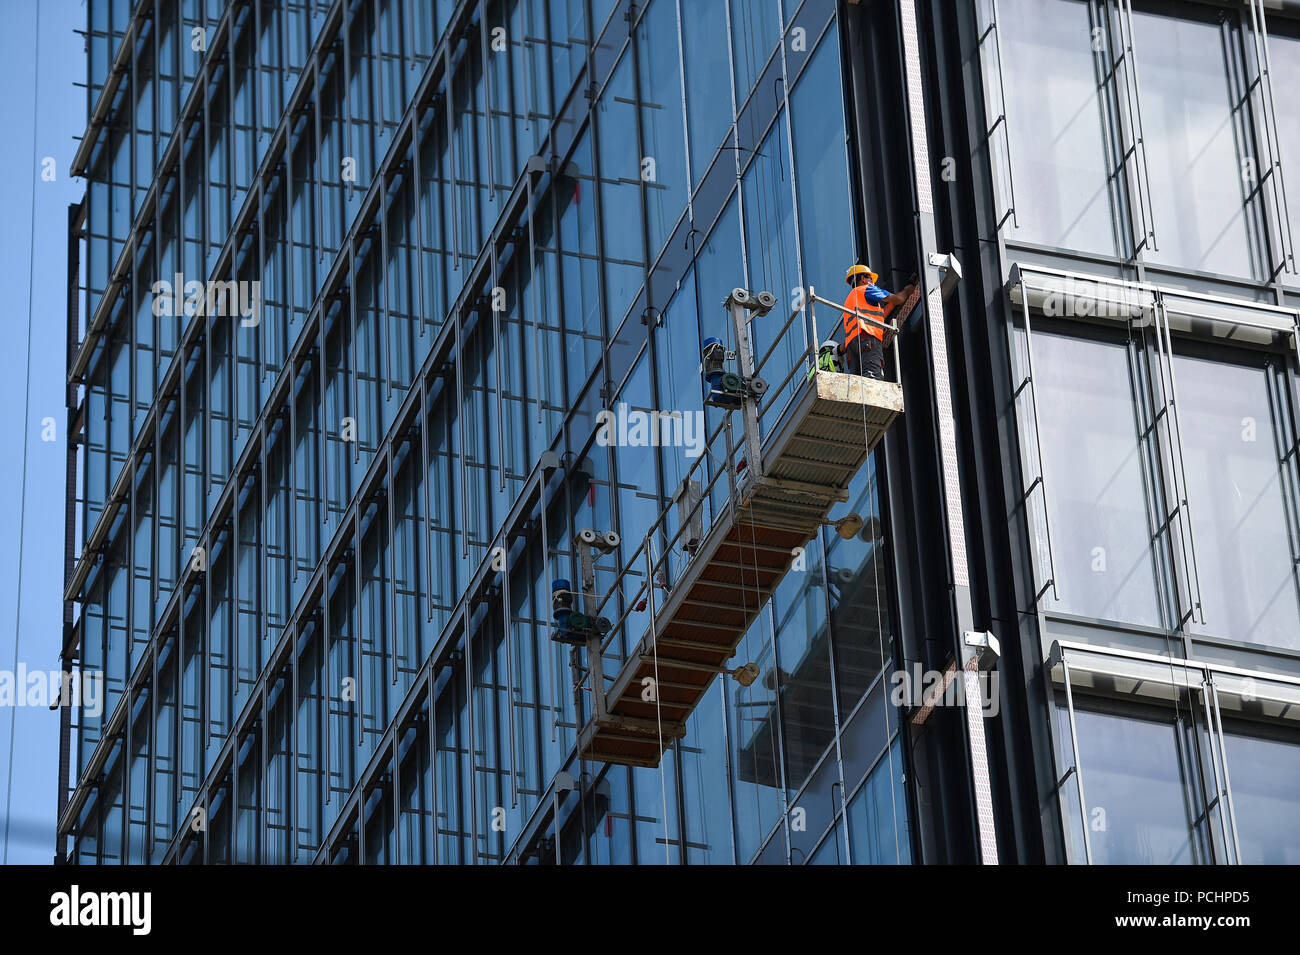 Construction workers on a suspended platform on a skyscraper glass facade Stock Photo